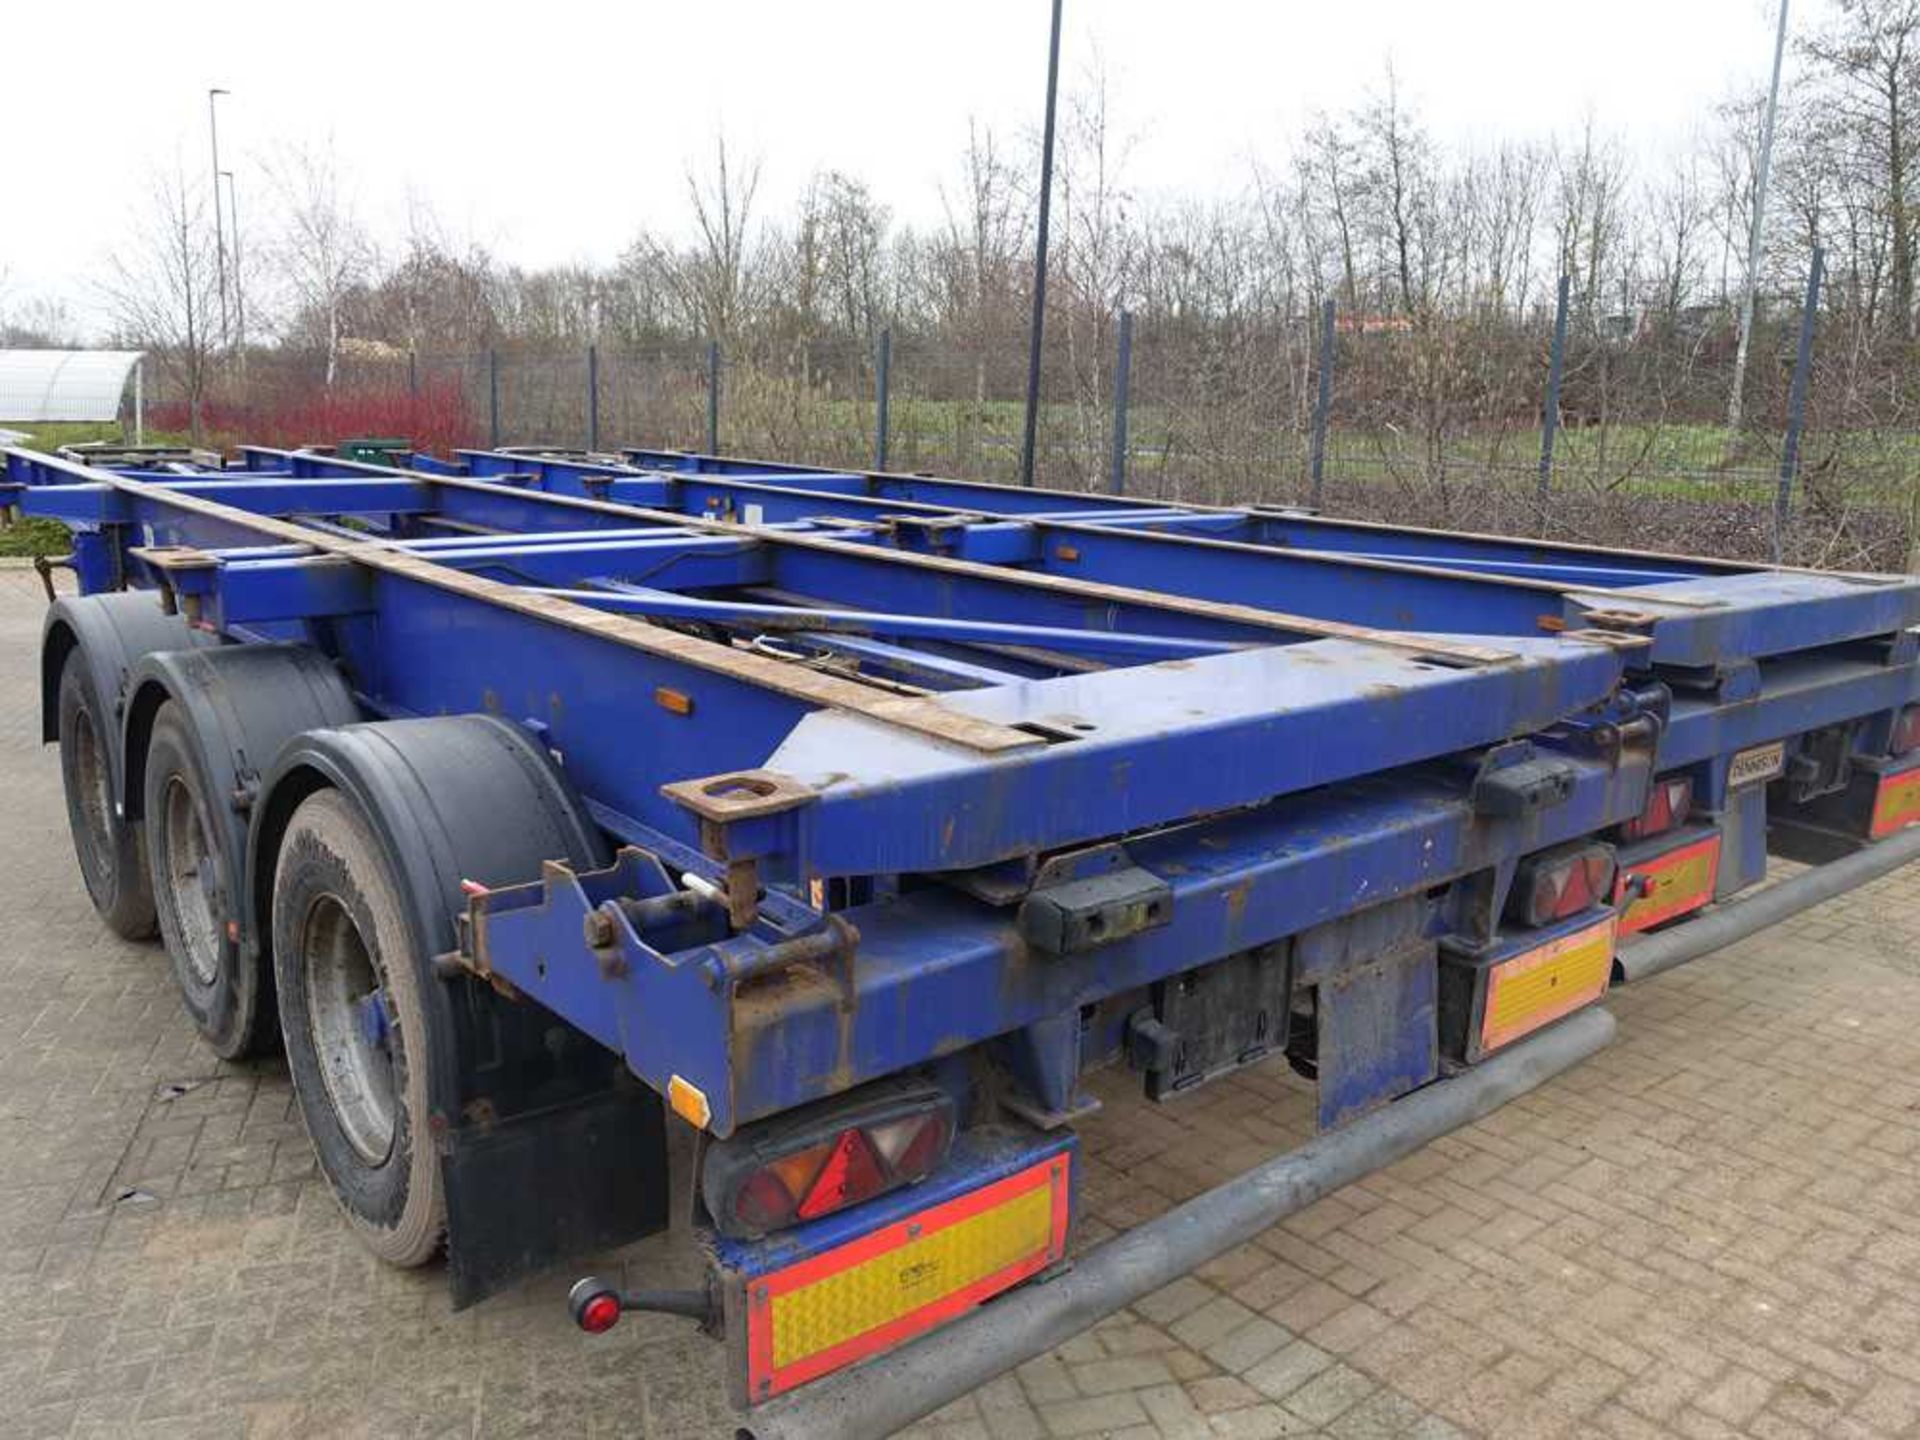 +VAT Dennison skeletal triaxle container trailer - 2010 39 tonne gross weight s/n C292898 - Image 4 of 8